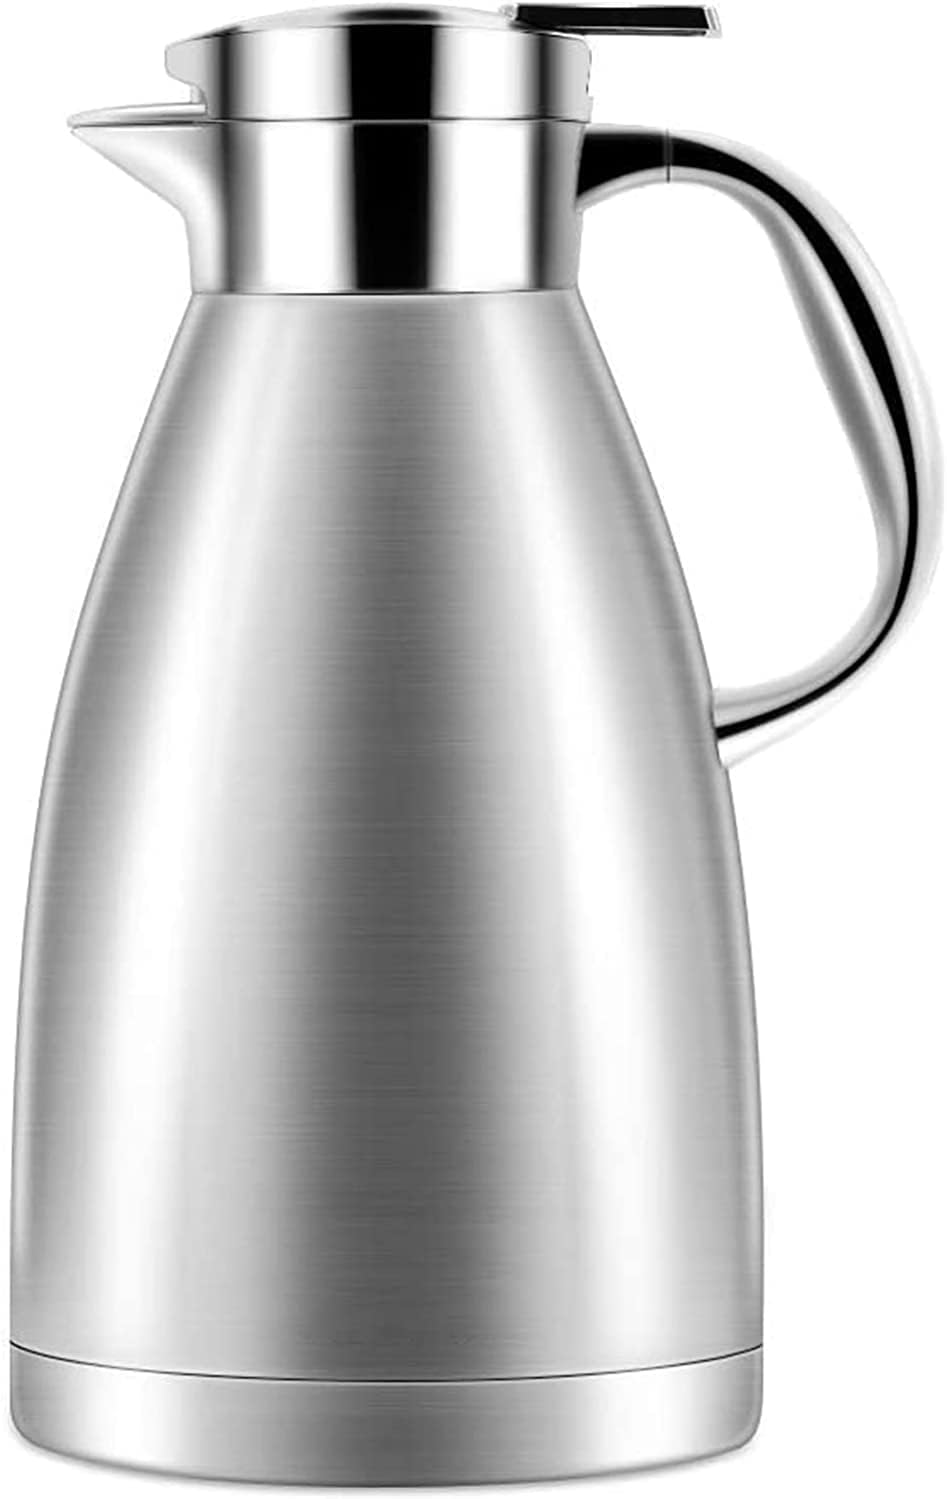 27oz Coffee Carafe 18/10 Stainless Steel/Double Walled Vacuum Insulate